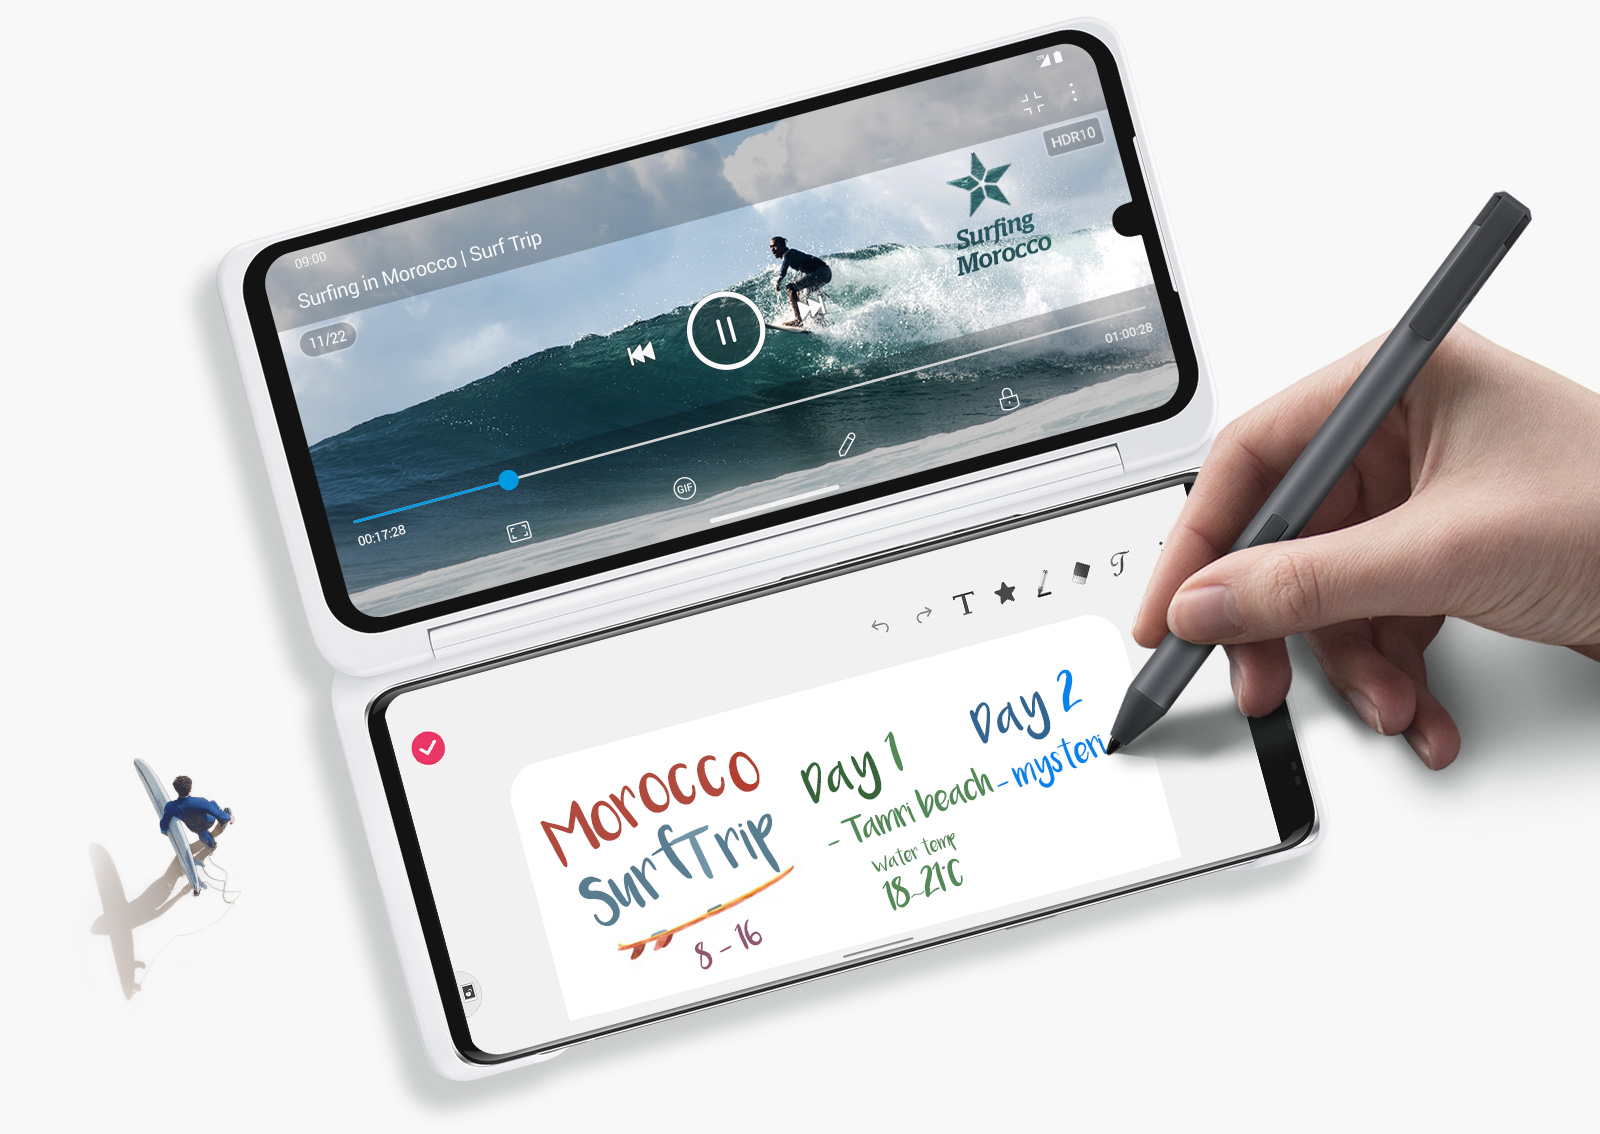 Lifestyle image of a user watching a video on the LG Dual Screen while taking notes on the LG VELVET with a compatible active stylus pen